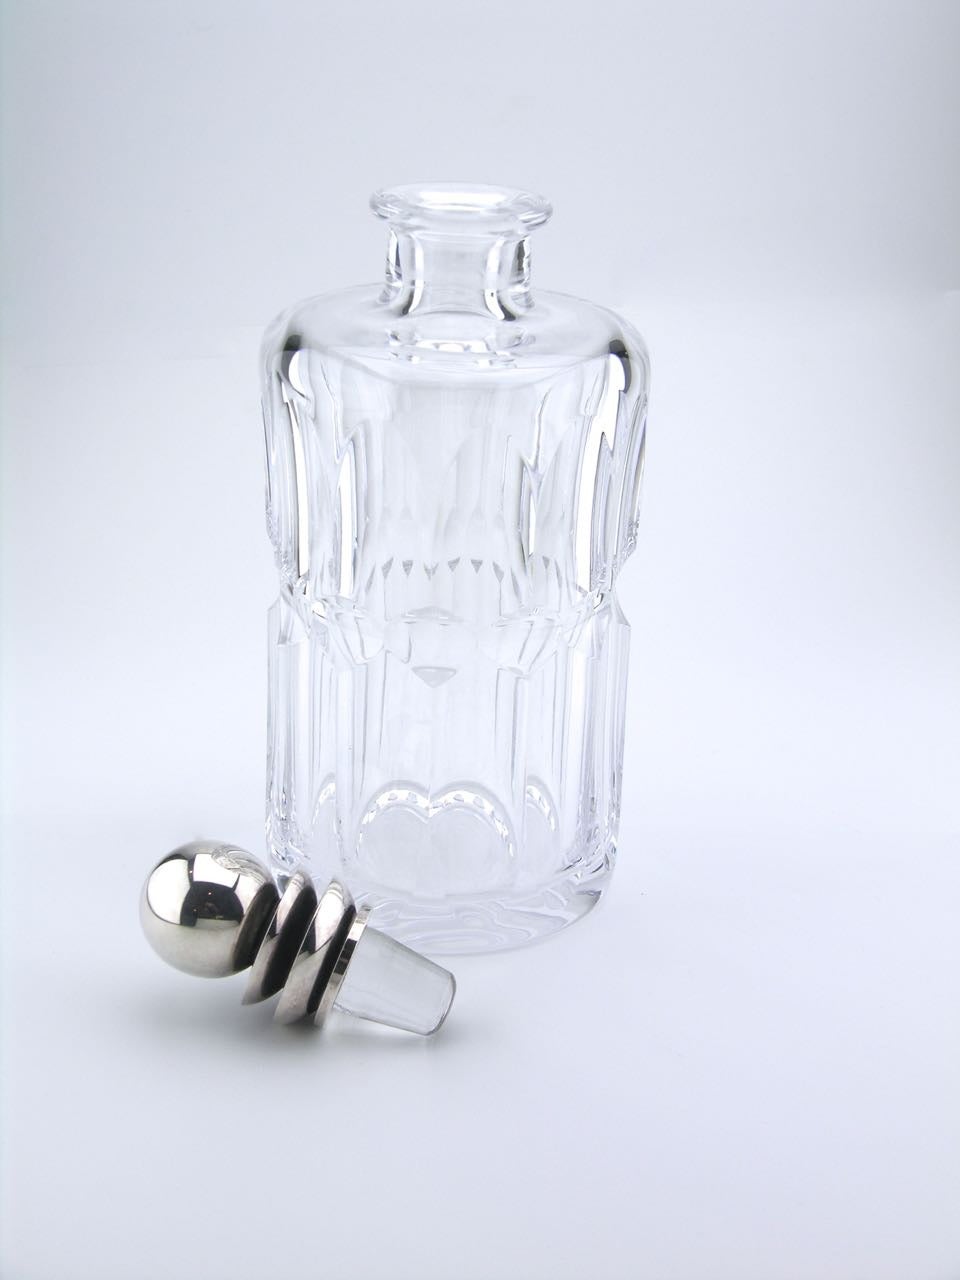 A rare example of a Georg Jensen decanter with a pyramid design stopper. The medium height decanter combines a simple facetted crystal body with a central concave section forming a hand grip around the decanter with a silver cased crystal stopper.